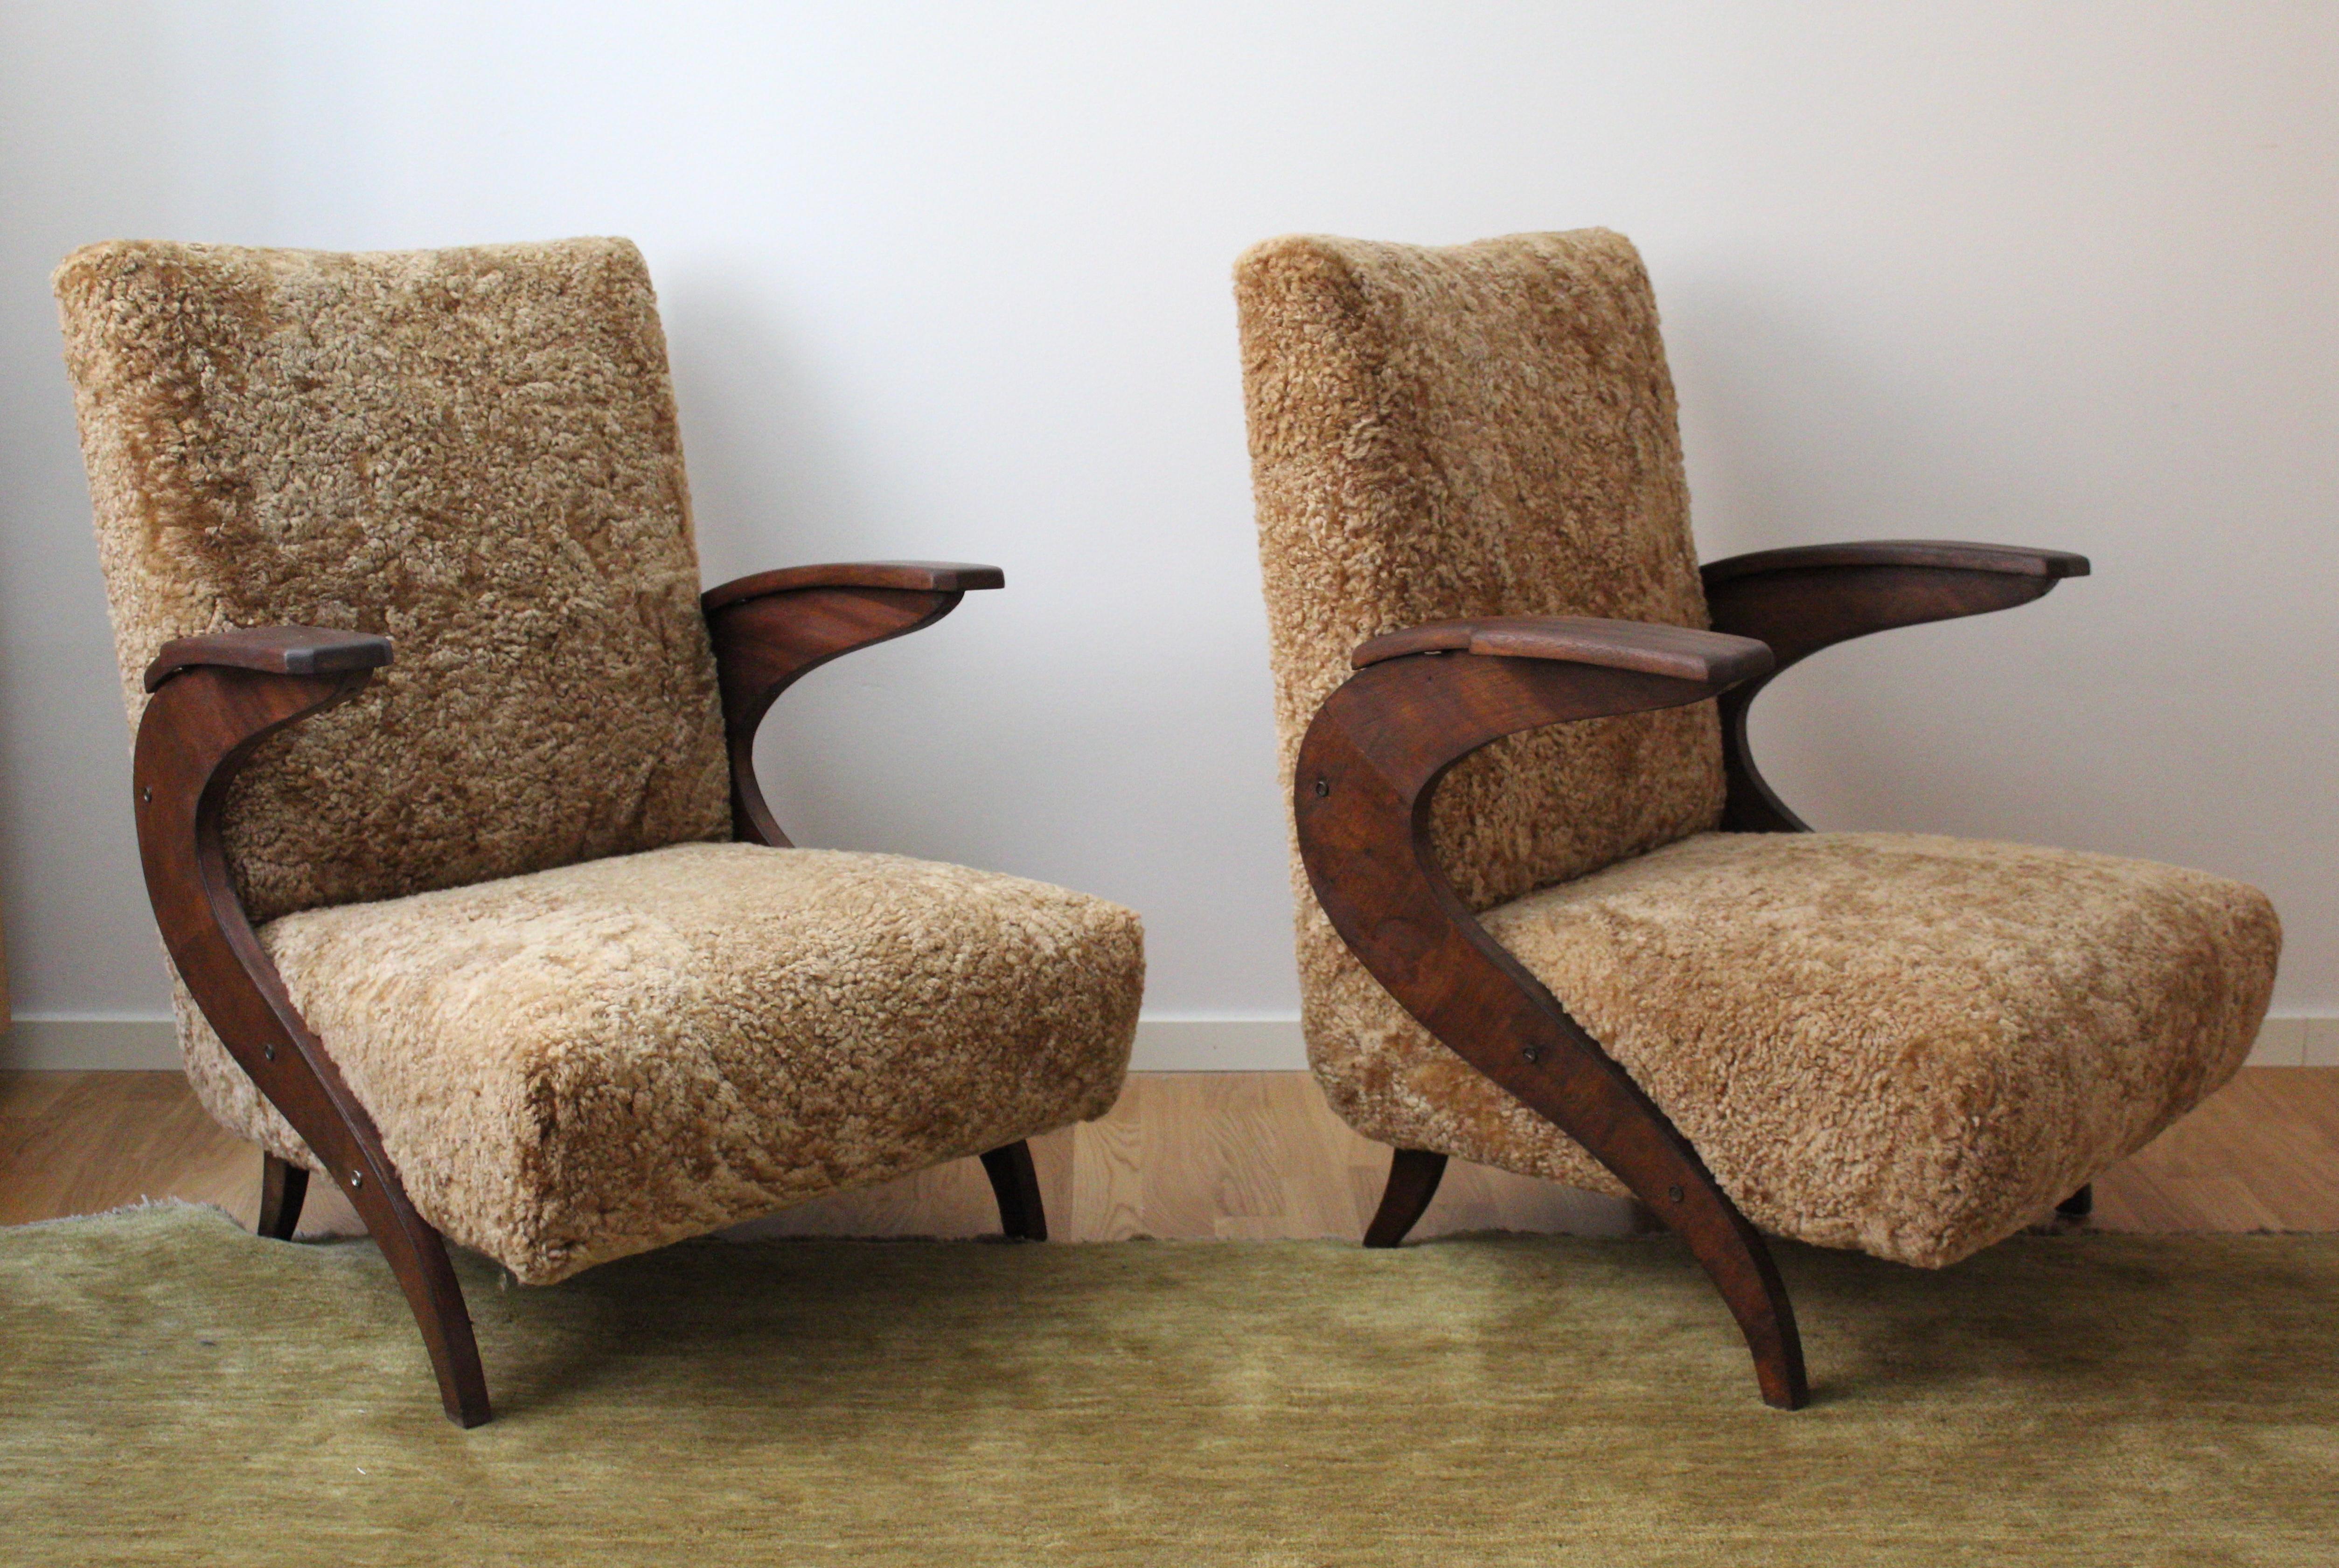 A pair of organic lounge chairs / arm chairs. Designed and produced in Italy, 1940s-1950s. 

Restored and reupholstered in brand new sheepskin upholstery.

Other designers of the period include Carlo Mollino, Franco Campo & Carlo Graffi, Isamu